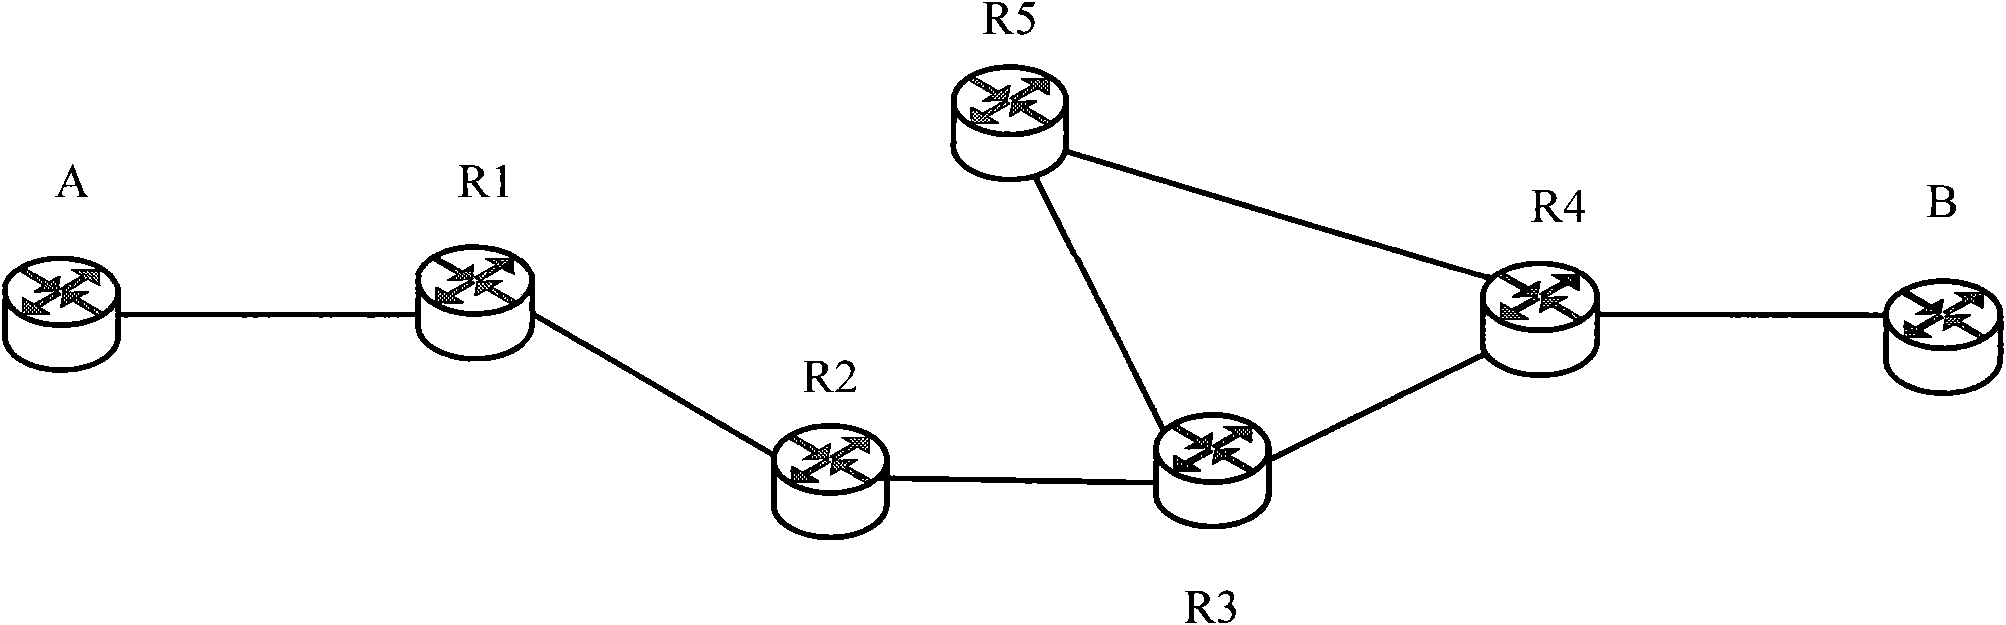 Method, head node and tail node of forwarding multicasting message